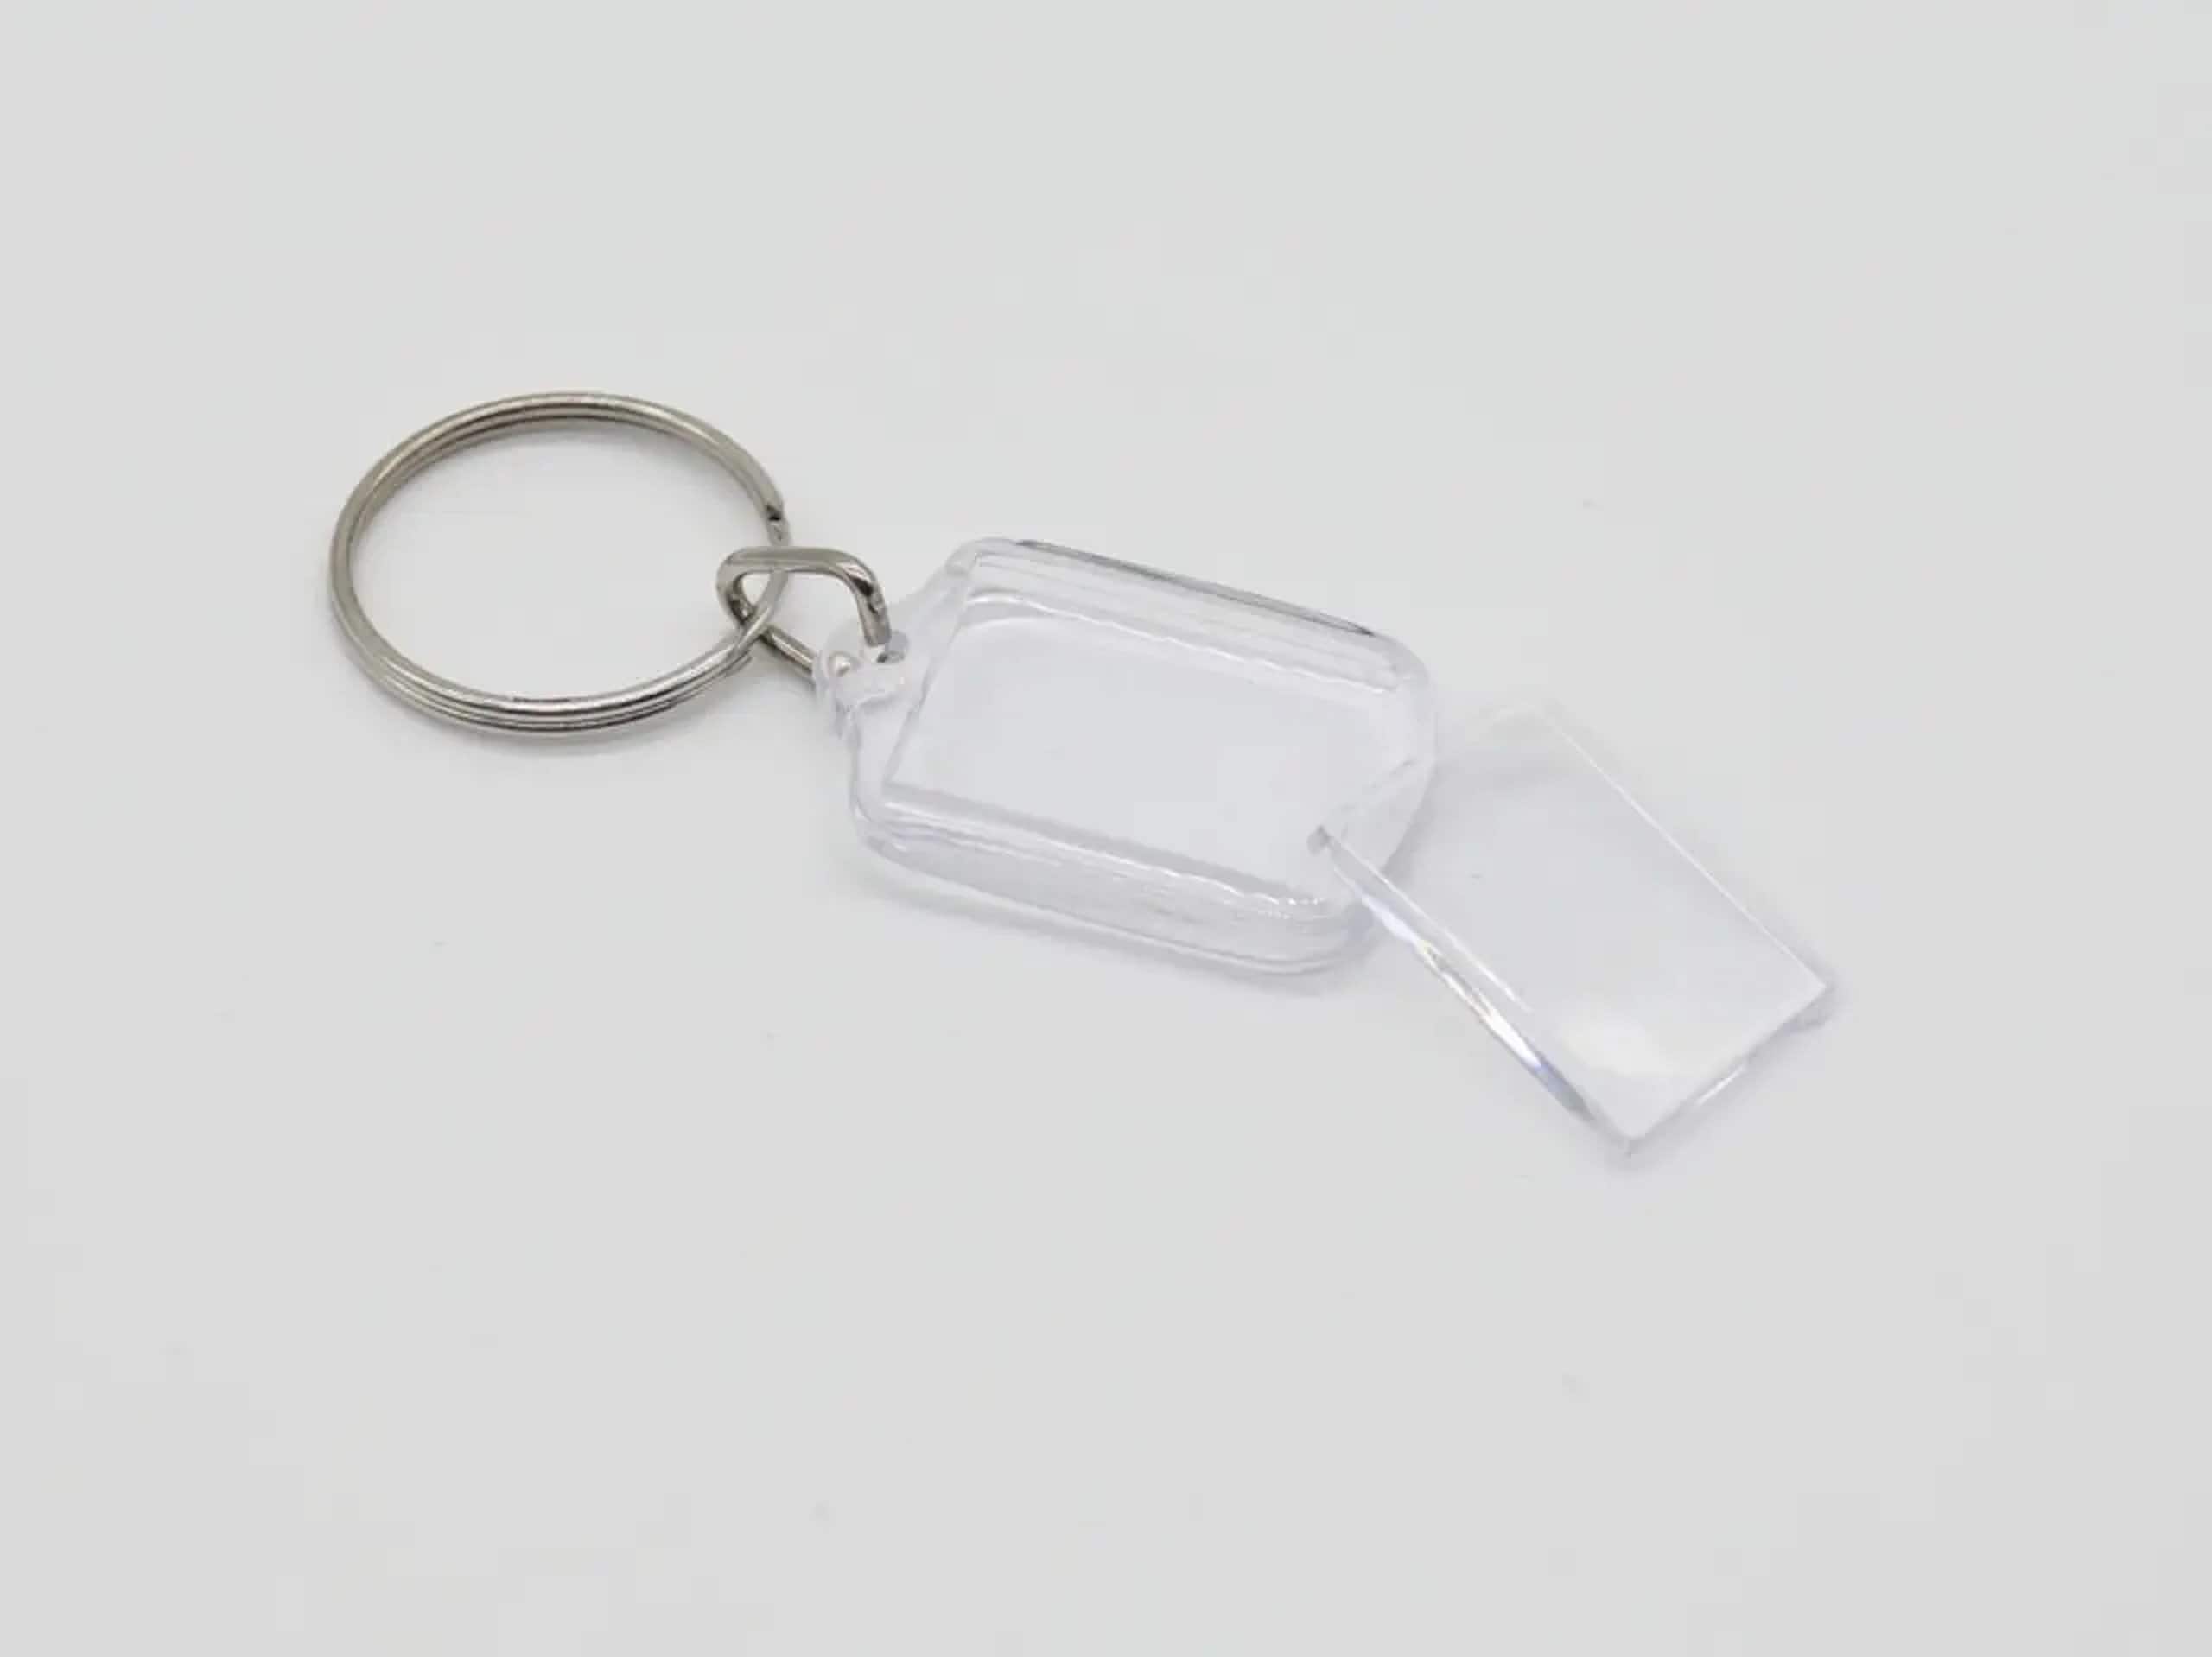 30 Clear Acrylic Keychain Blanks With Flower Mirror And Wreaths Rectangle  Song Design For Custom Vinyl And DIY Tags From Youngstore10, $11.25